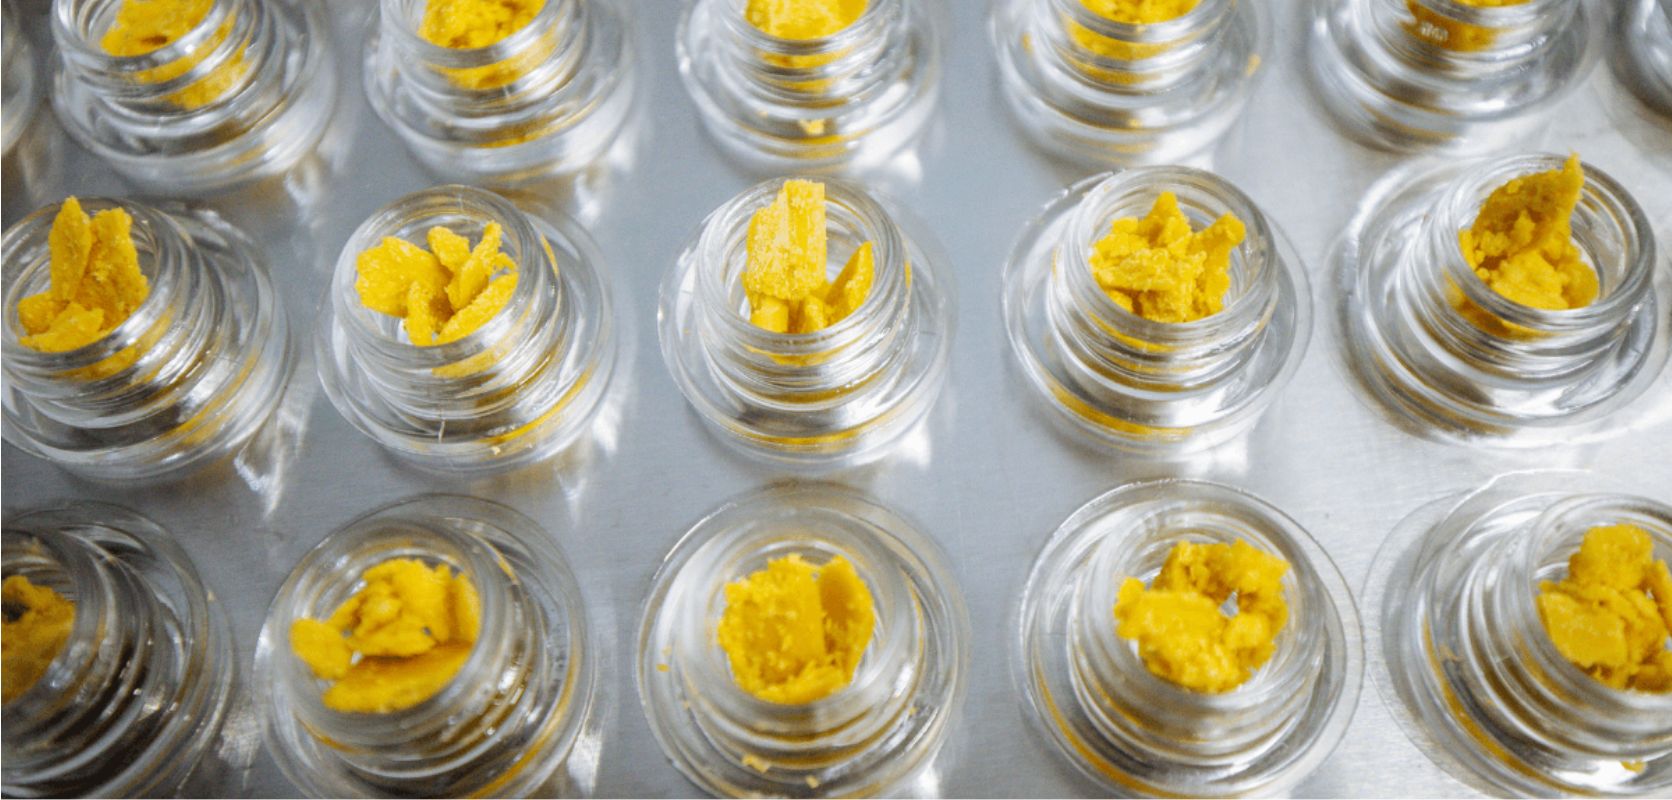 Now that you know what cannabis concentrates, including wax, shatter, and oils, are, you’re probably wondering where to buy them. 